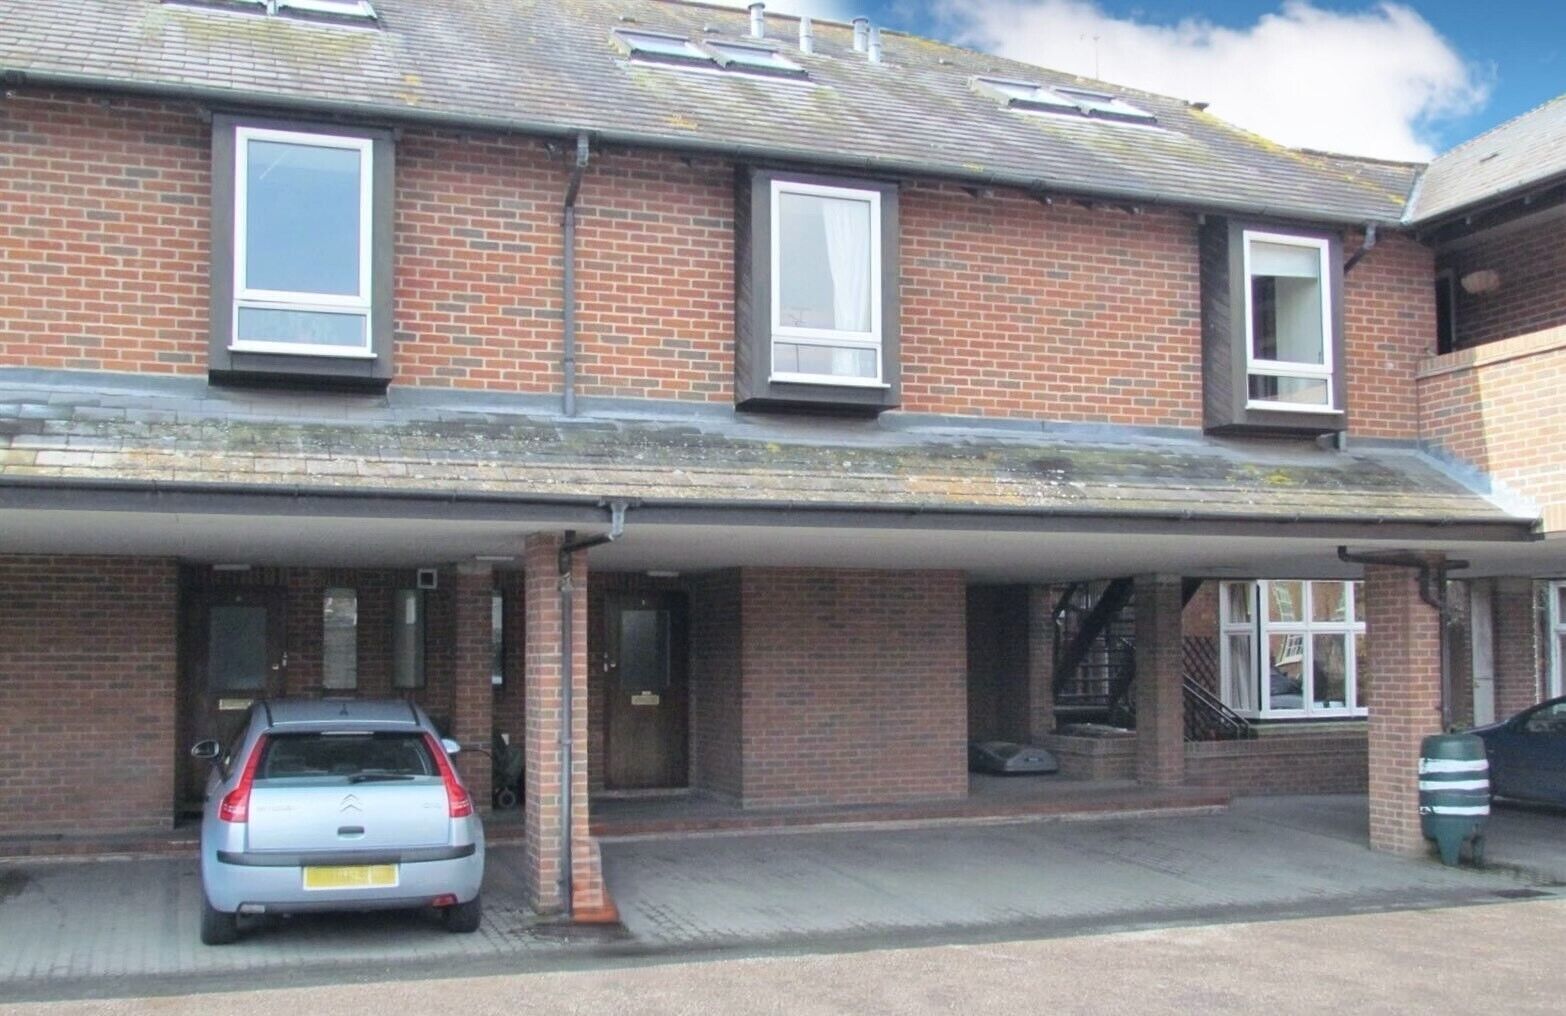 2 bedroom mid terraced flat for sale Portway Mews, Wantage, OX12, main image